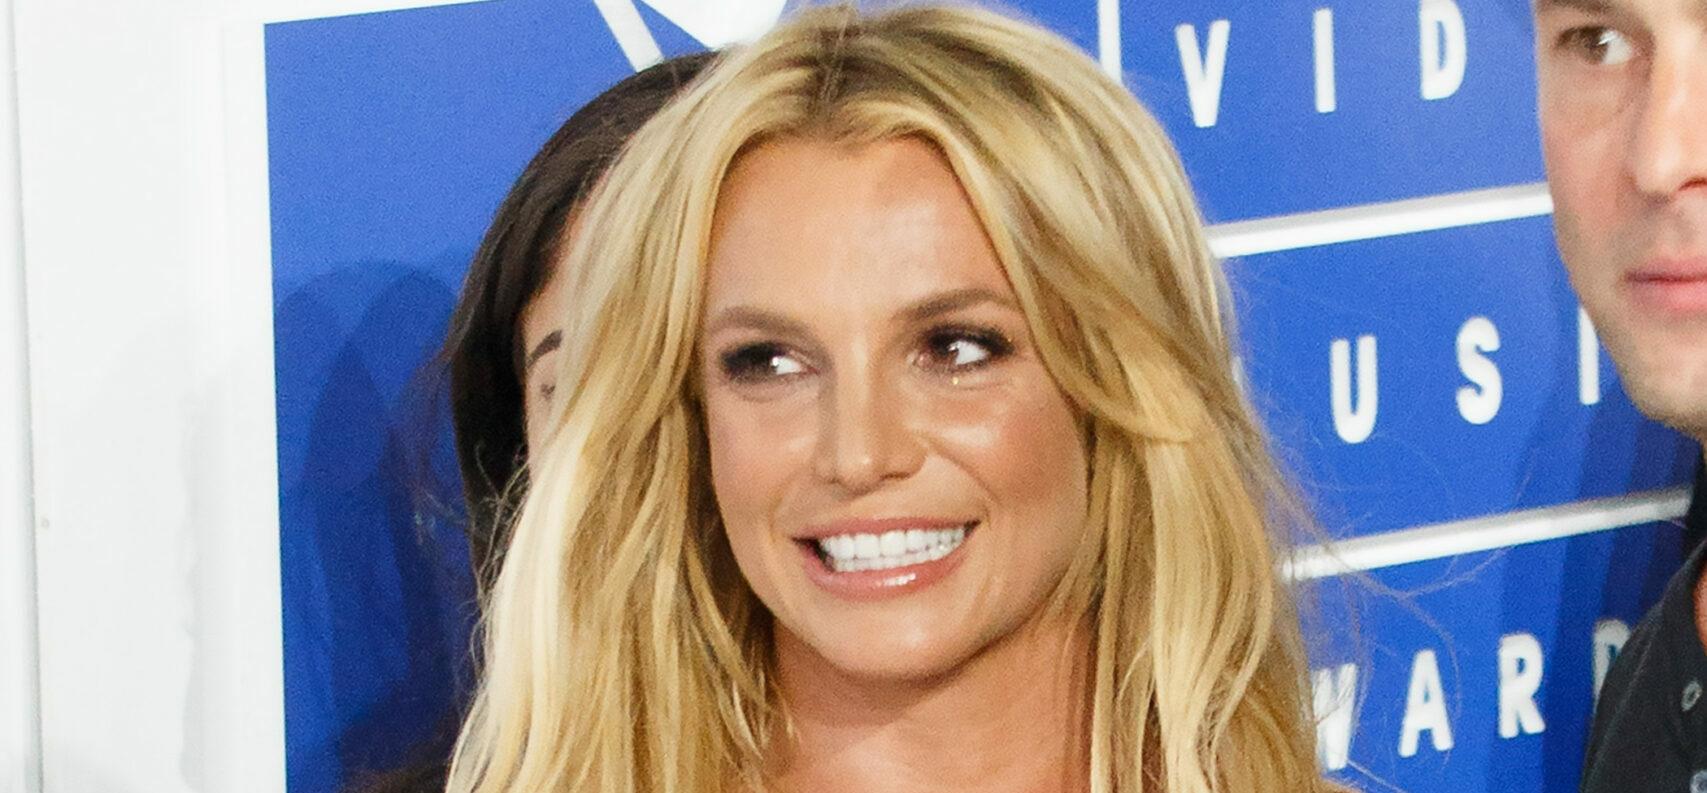 Britney Spears Talks About ‘Clarity’ While Chillin With ‘Euphoria’ Creator & The Weeknd!